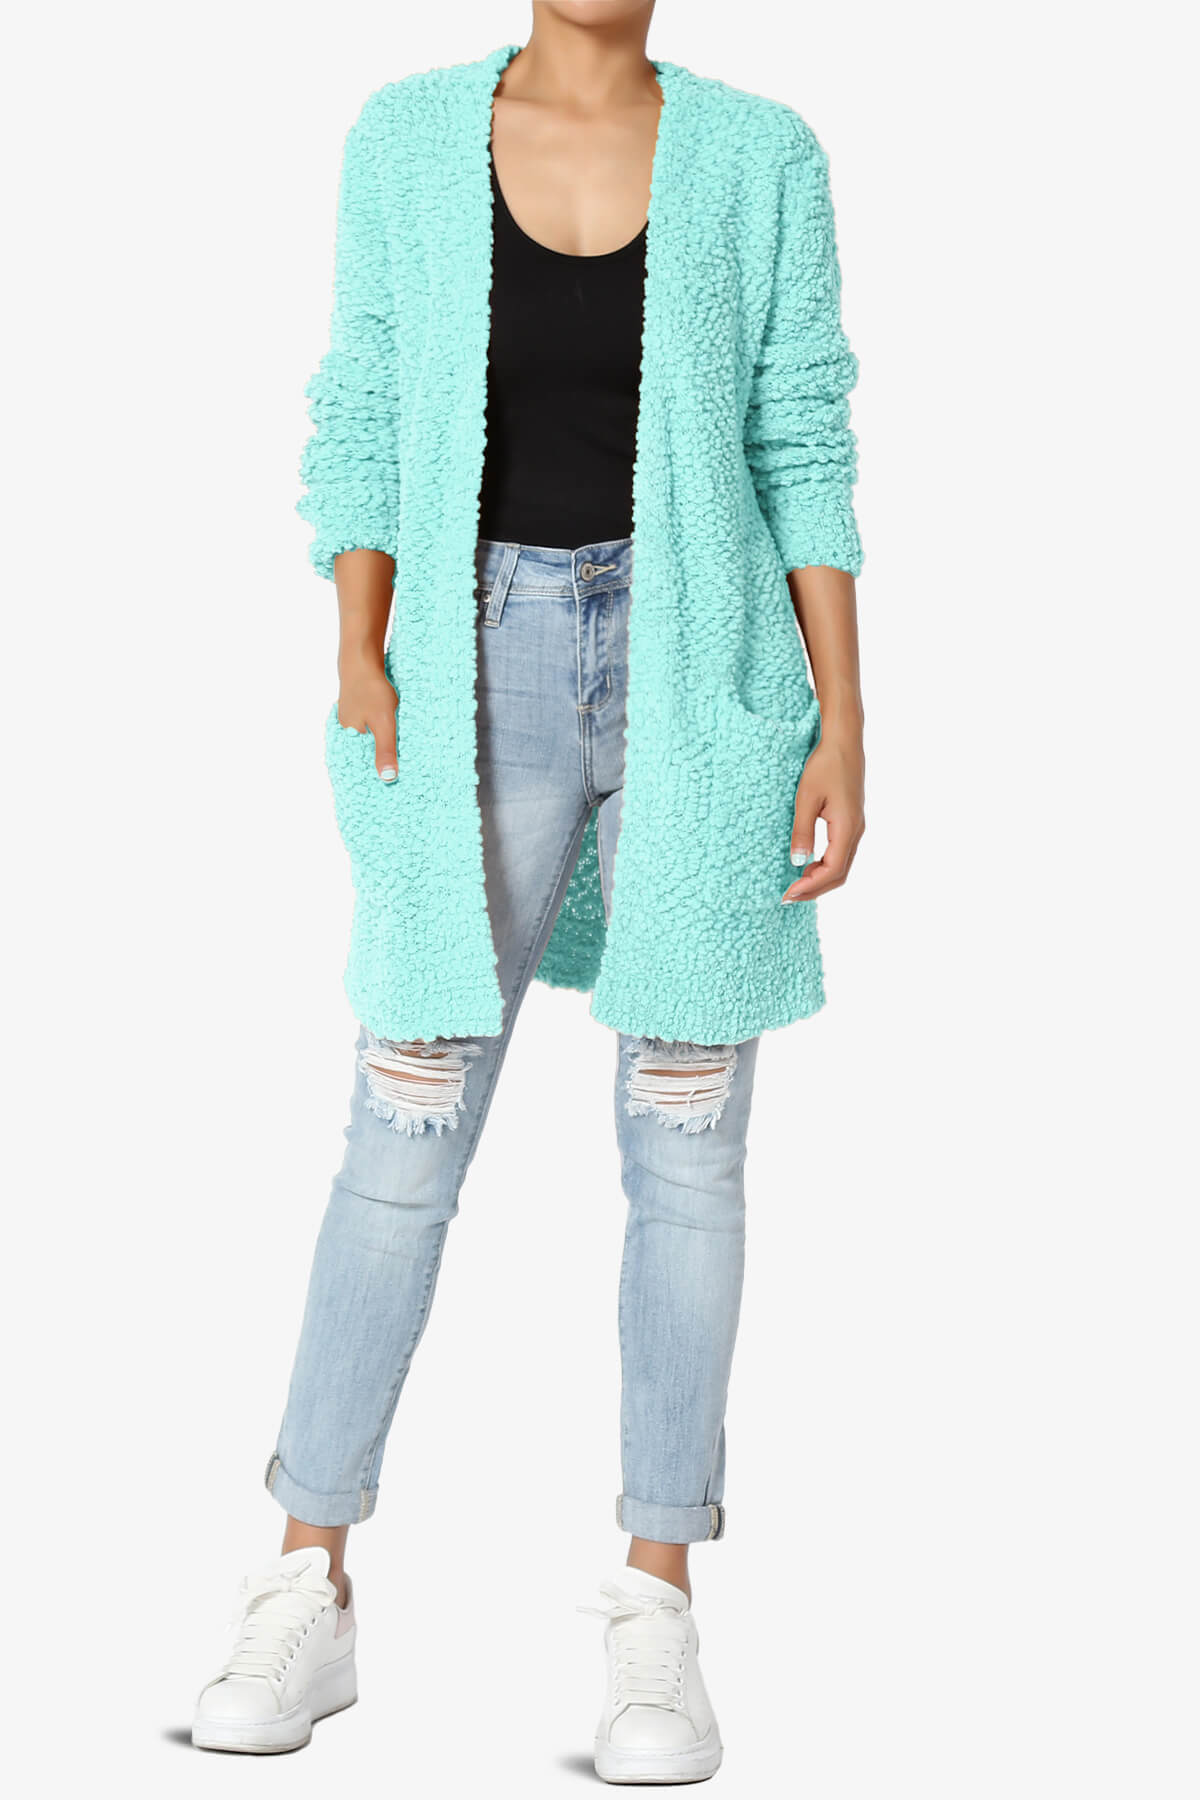 Load image into Gallery viewer, Barry Soft Popcorn Knit Sweater Cardigan BLUE MINT_6
